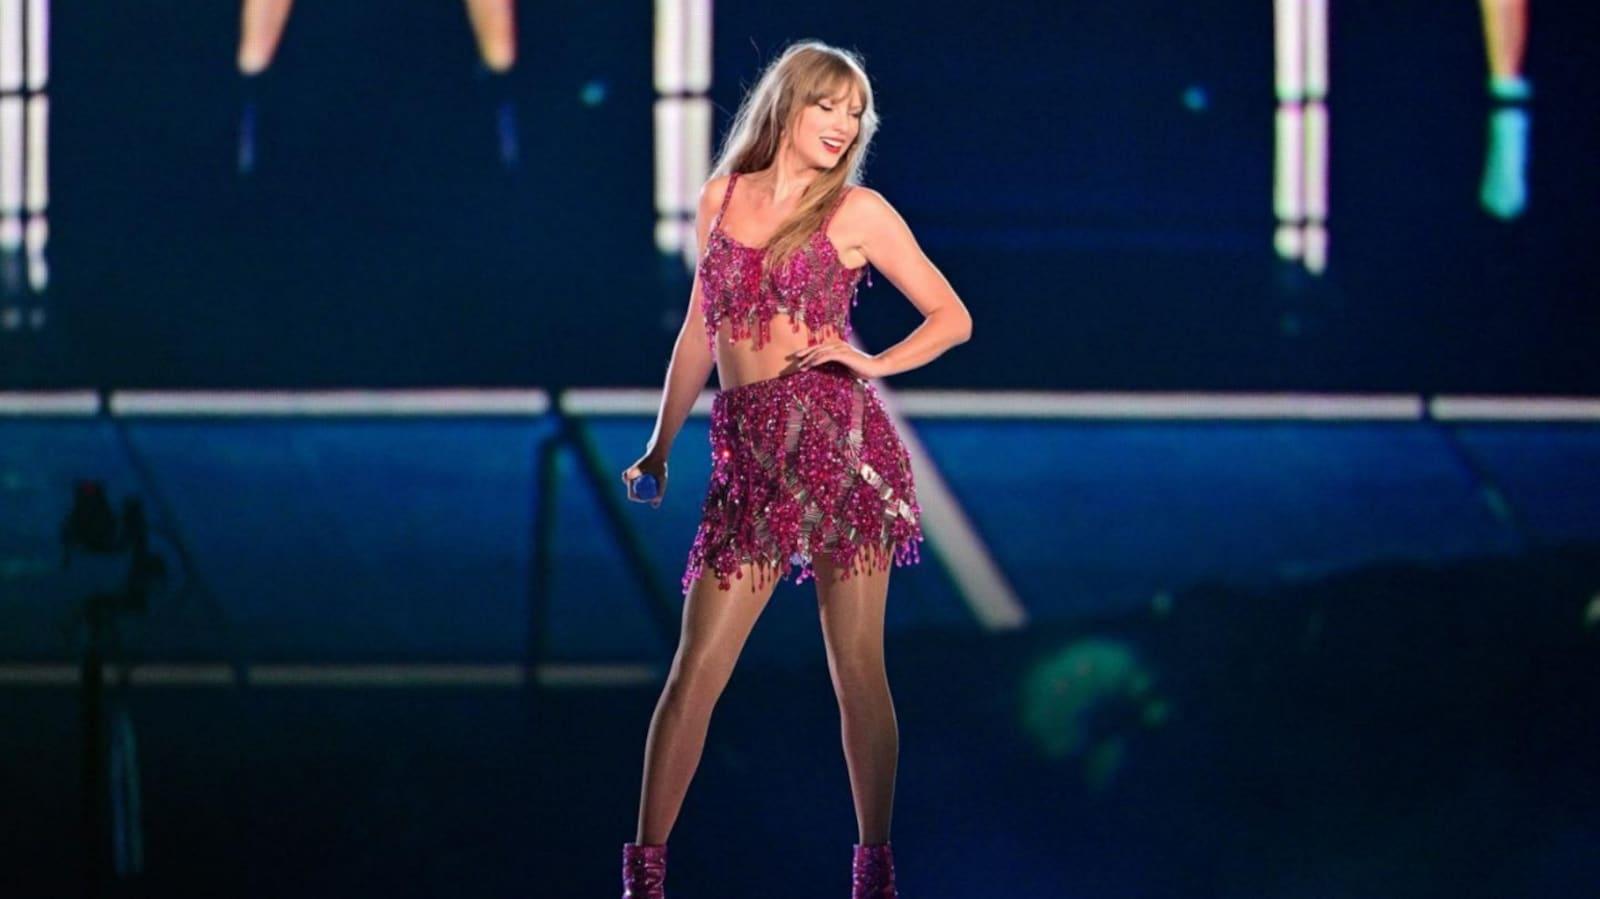 Video Taylor Swift Ducks To Avoid Bracelet Thrown At Her During